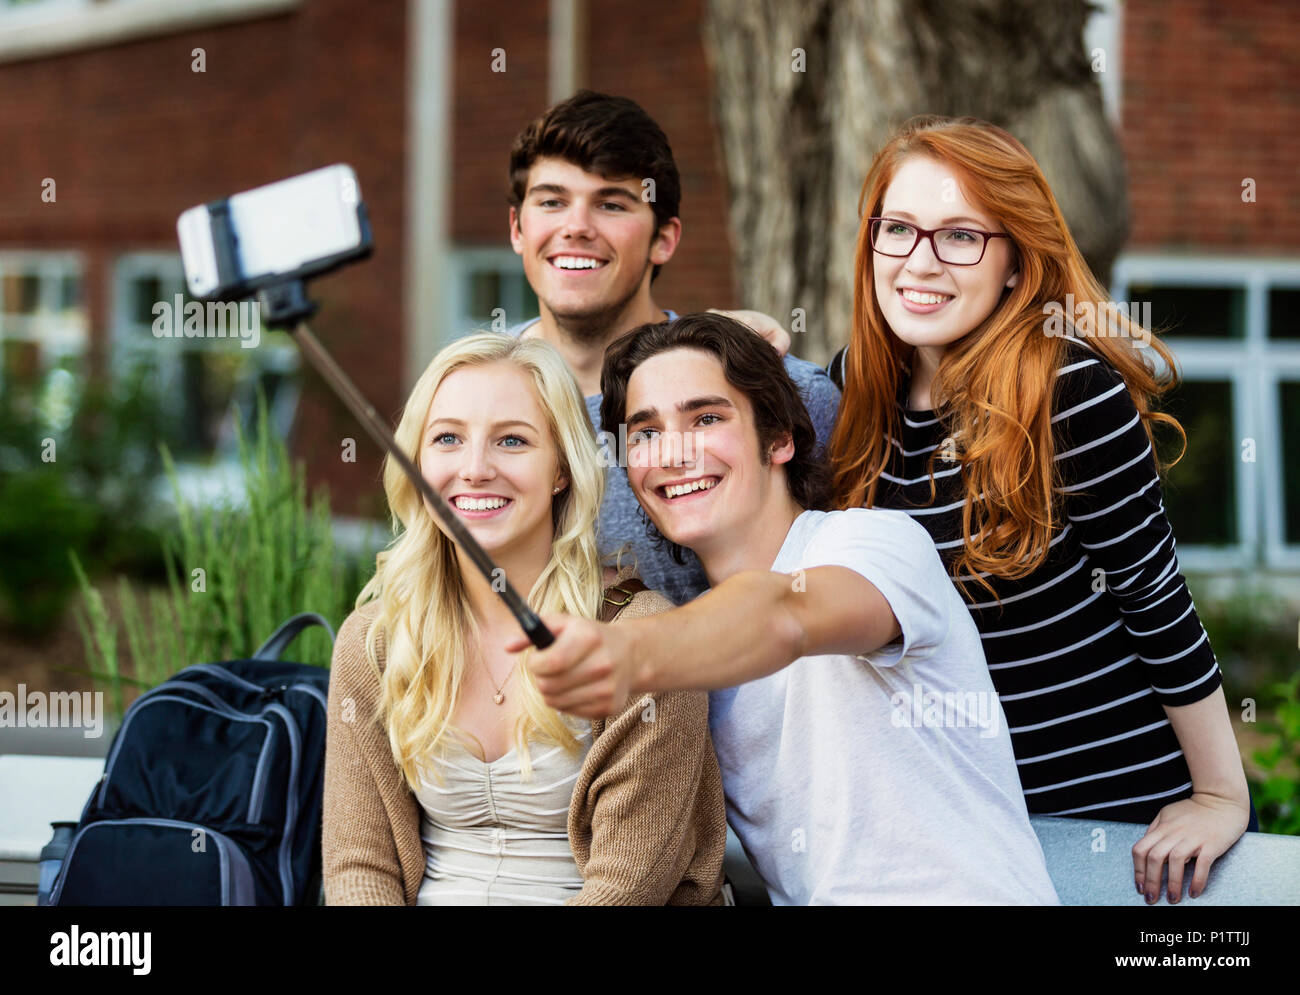 A group of four friends sitting on a bench taking a self-portrait with a smart phone using a selfie stick on a university campus Stock Photo